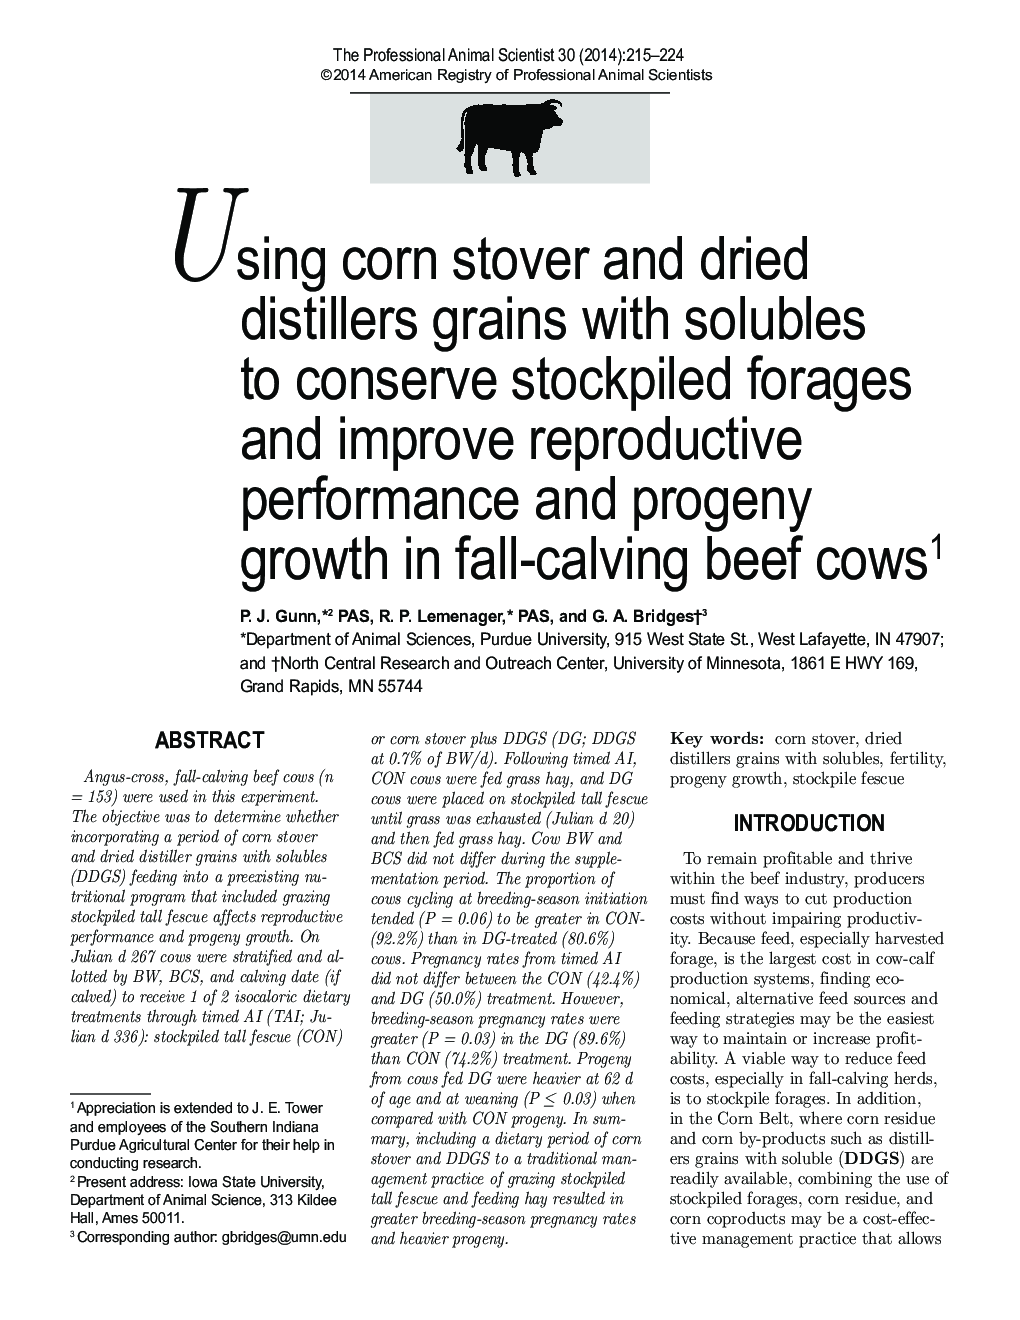 Using corn stover and dried distillers grains with solubles to conserve stockpiled forages and improve reproductive performance and progeny growth in fall-calving beef cows1